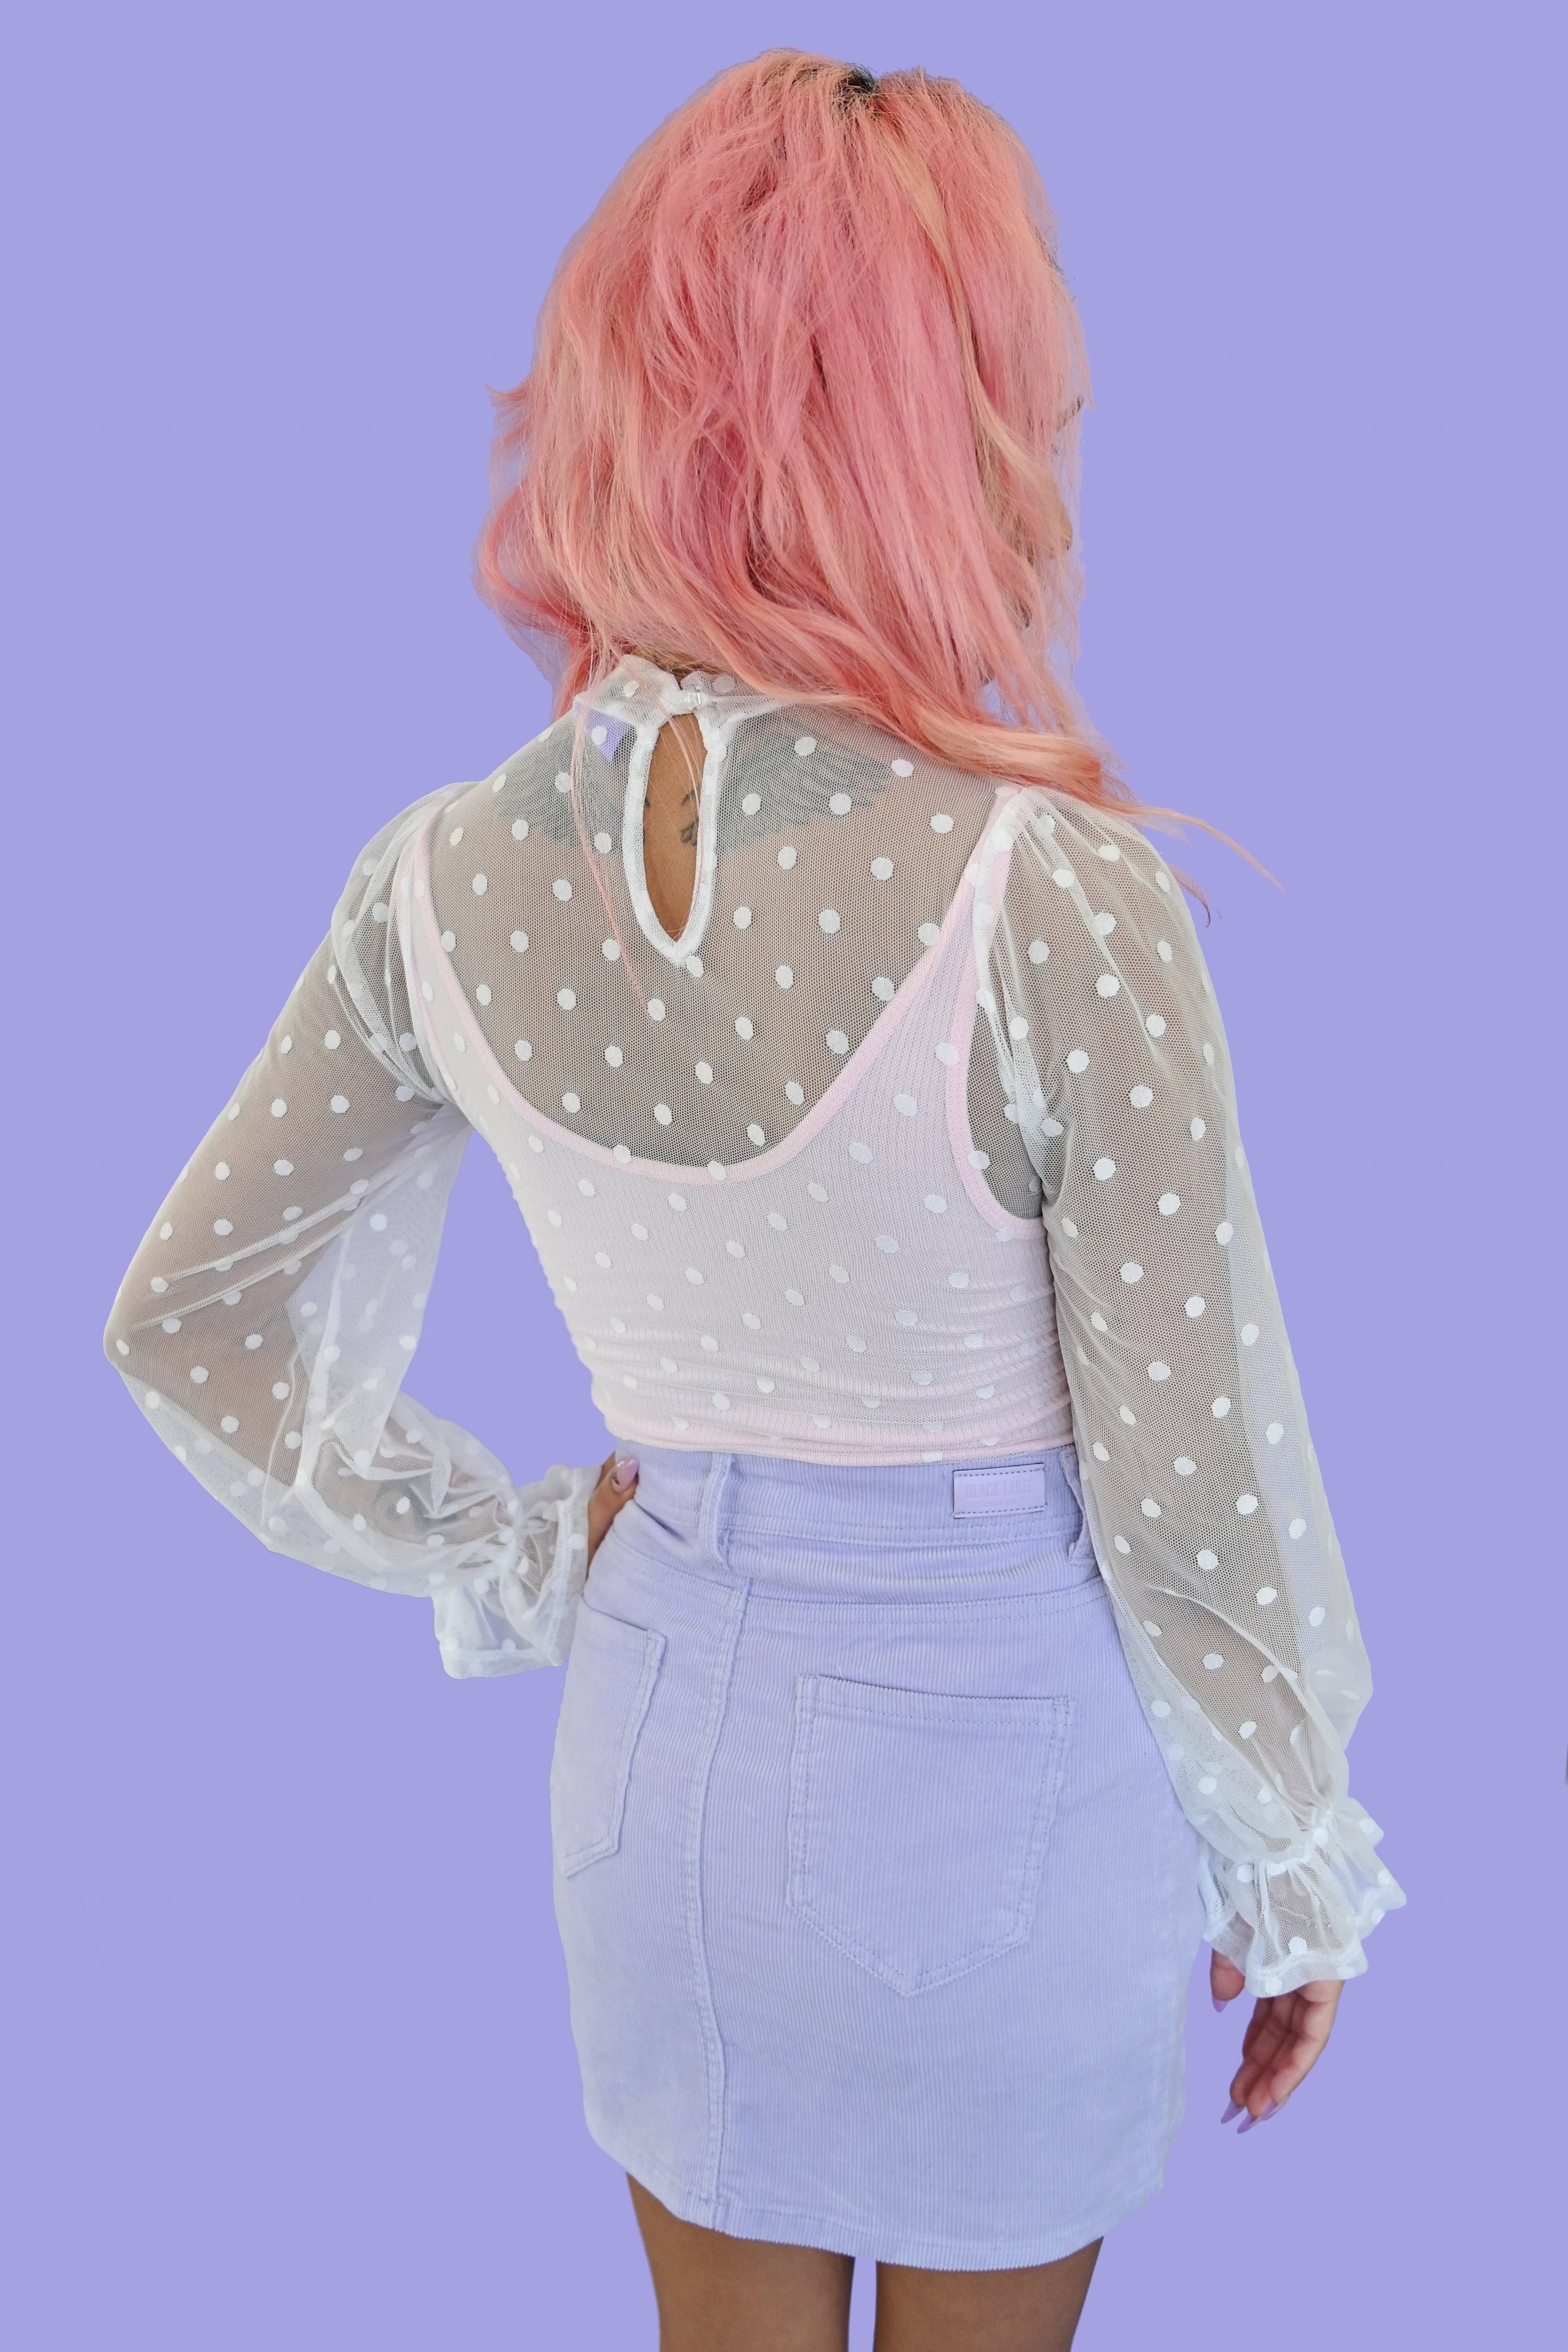 sheer white polka dot blouse with ruffled sleeves and a peephole button closure on the back